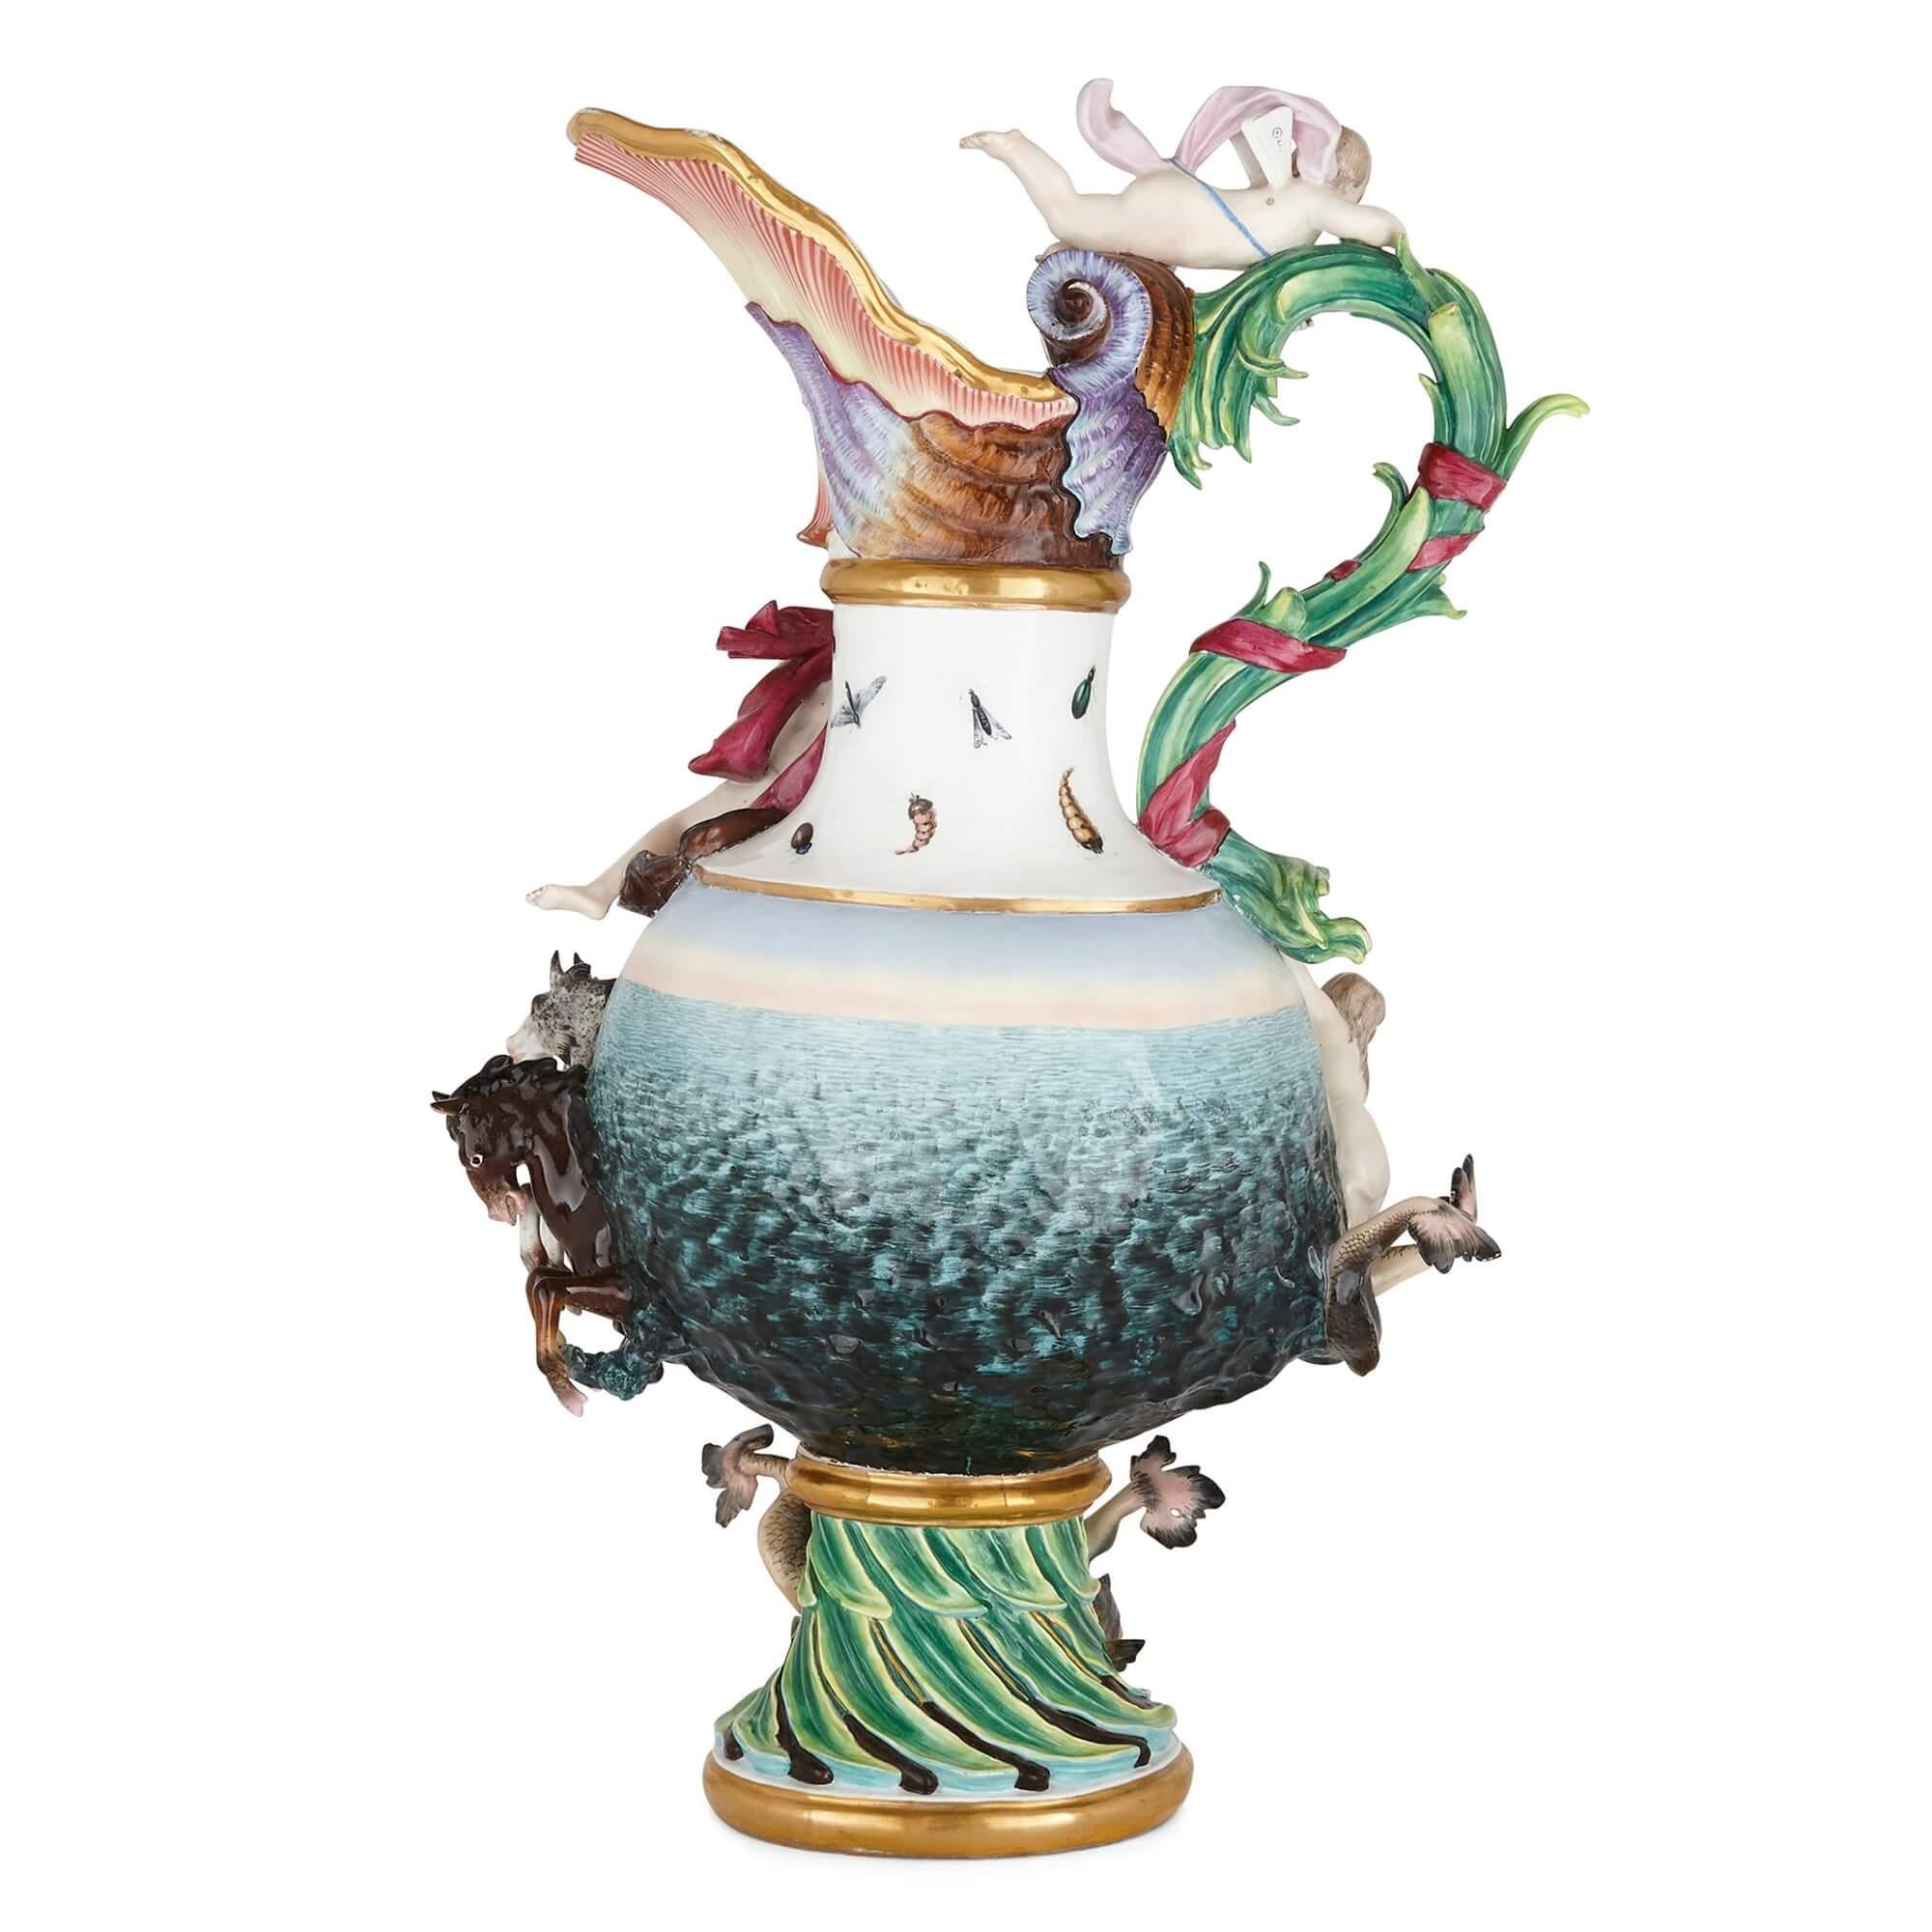 Hand-Painted Large Porcelain ‘Water’ Ewer from the ‘Elements’ Series by Meissen